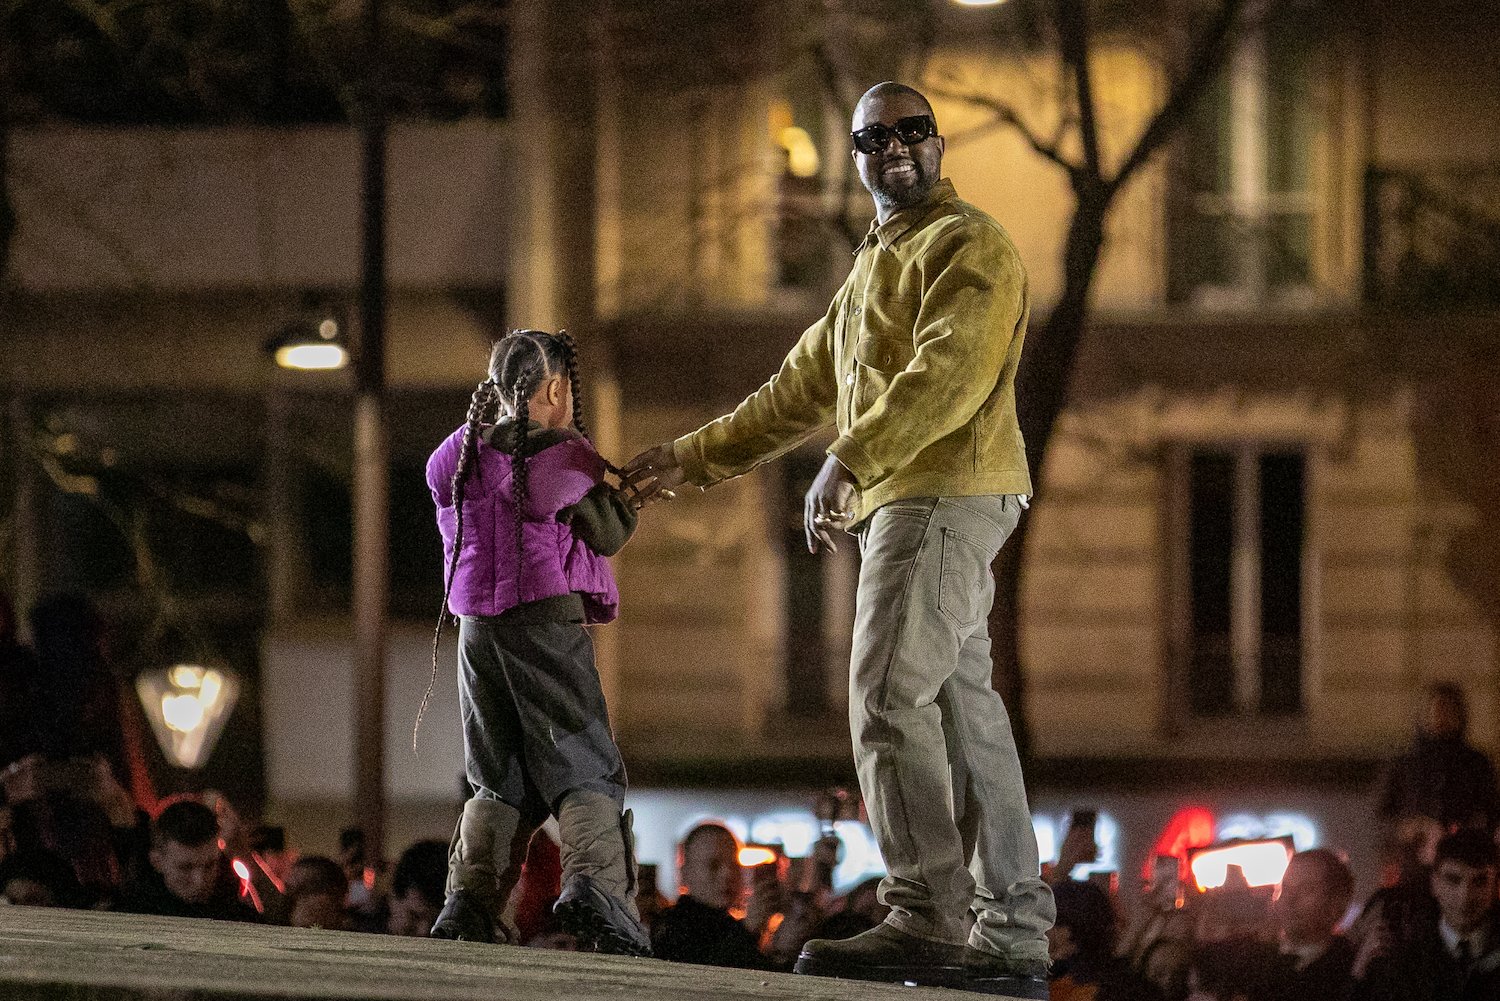 Kanye West and North West, who recently met her dad's new wife Bianca Censori, on stage together